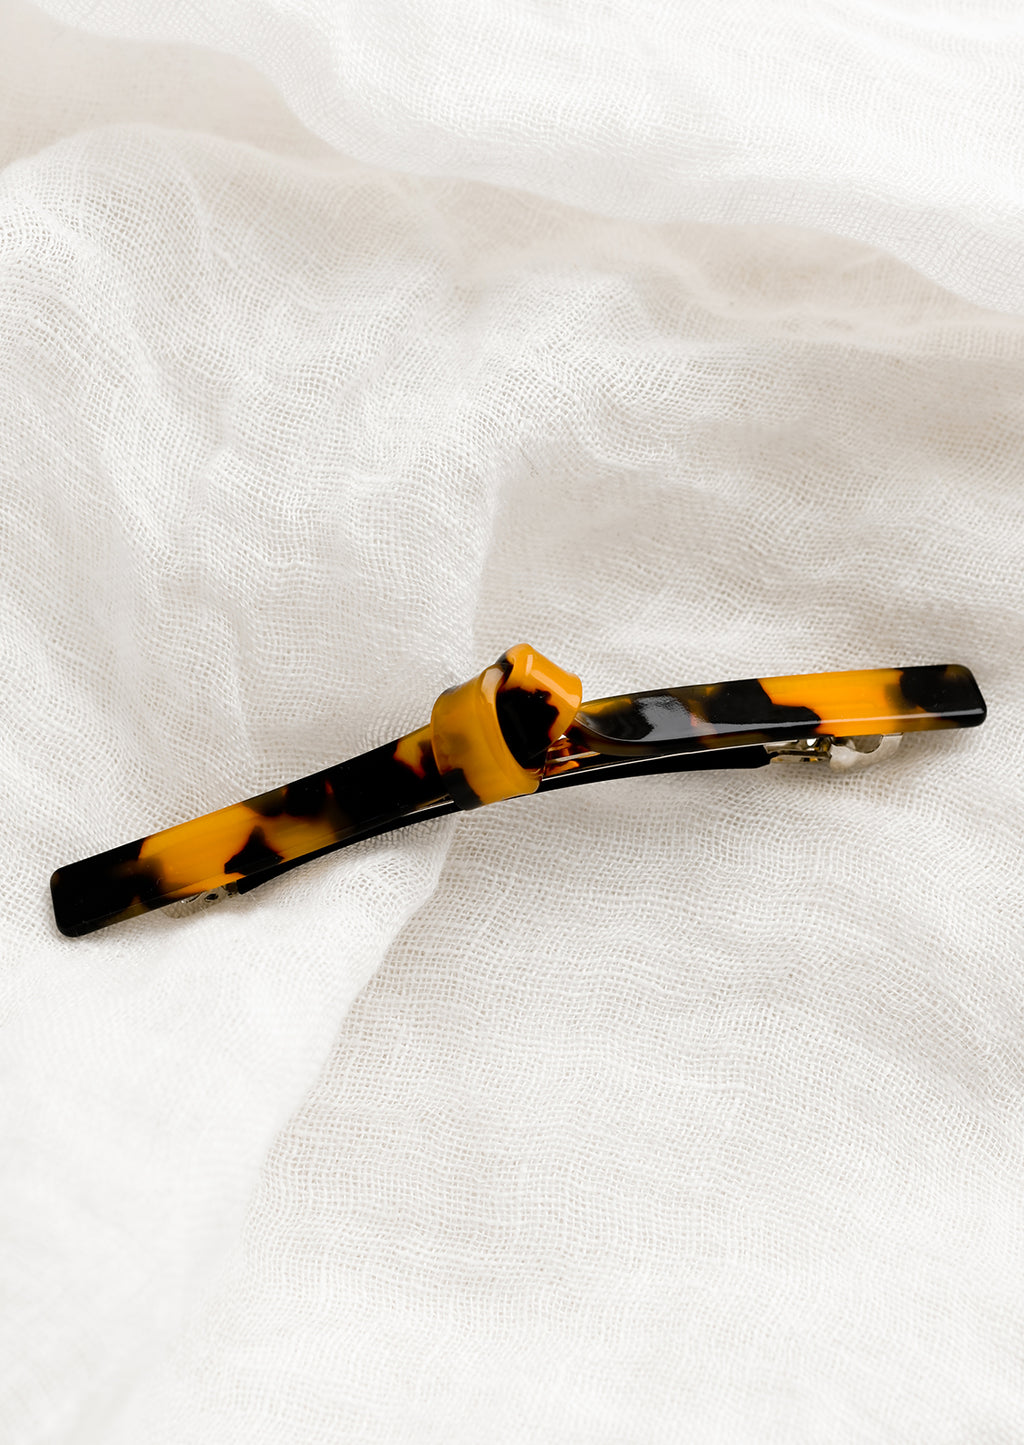 Tortoise: Acetate barrette with knot detail in tortoise